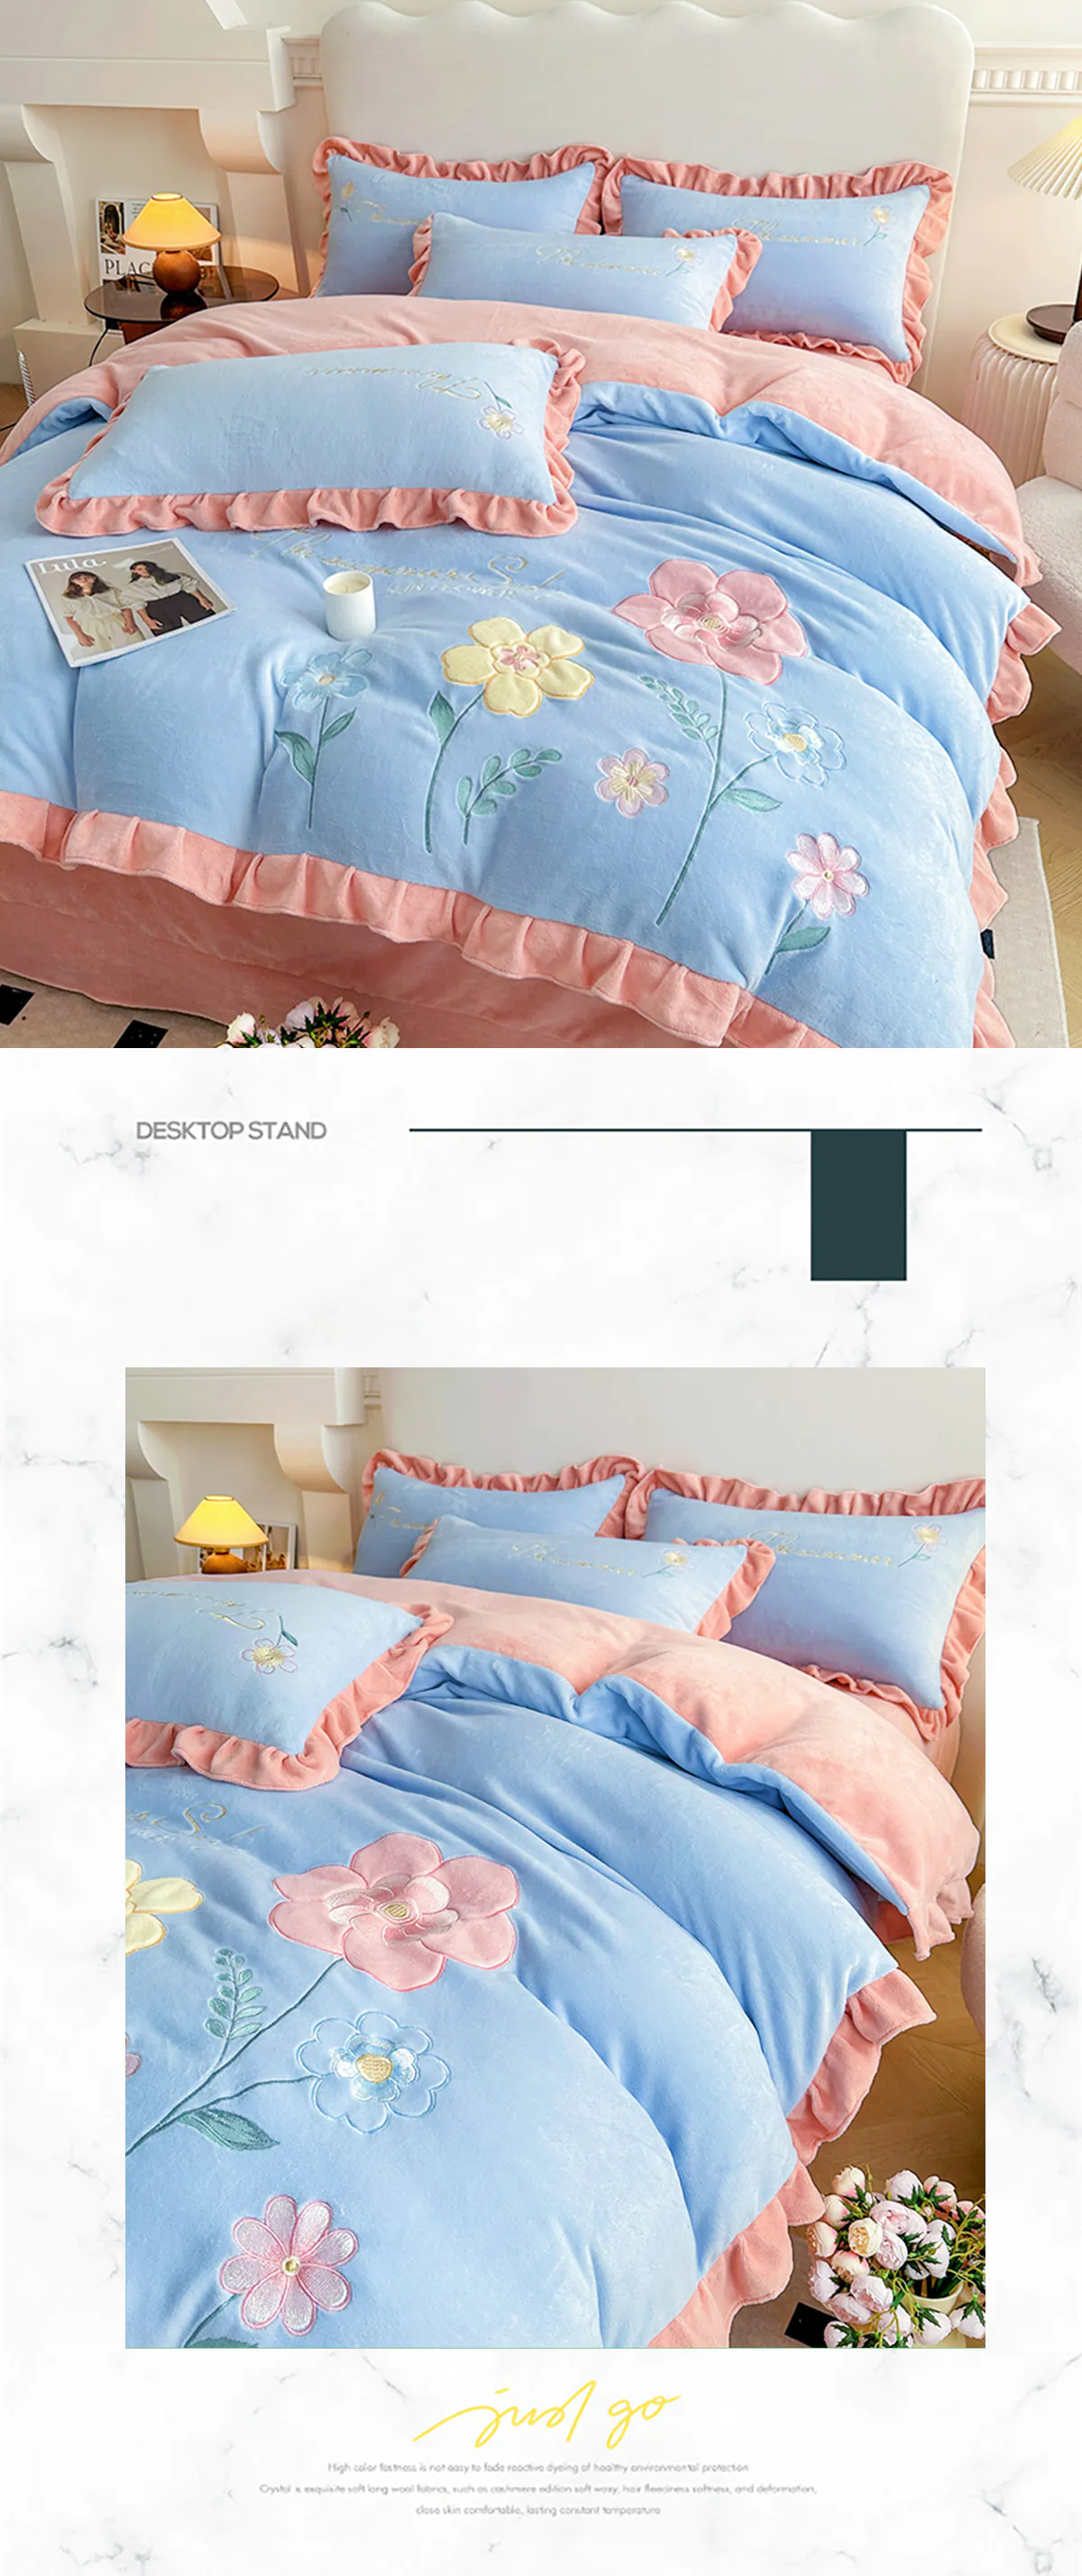 Comfy-Milk-Fiber-Embroidery-Quilt-Cover-Bed-Sheet-Pillowcases-Set19